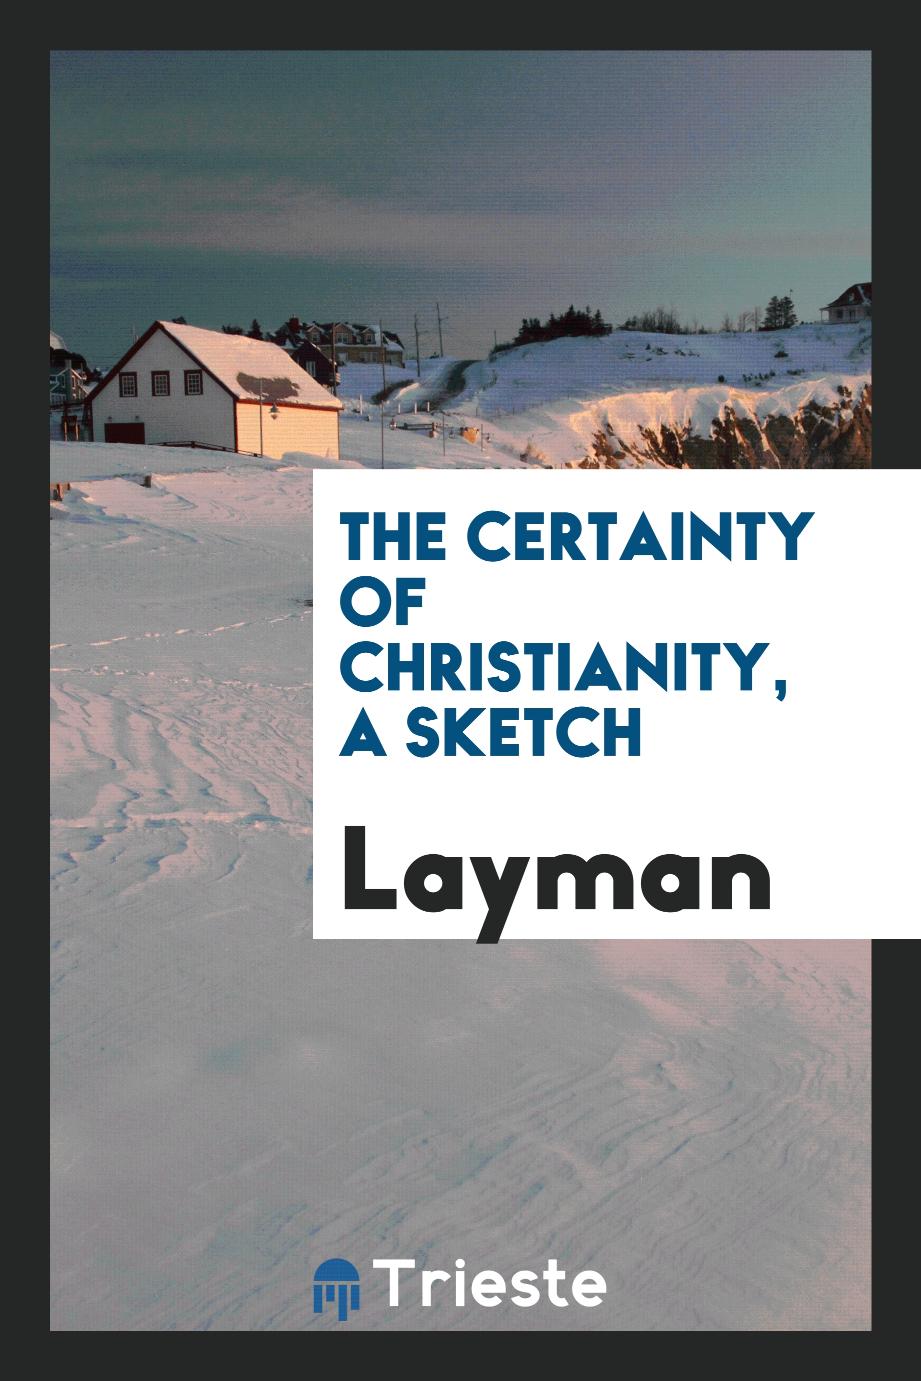 The certainty of Christianity, a sketch